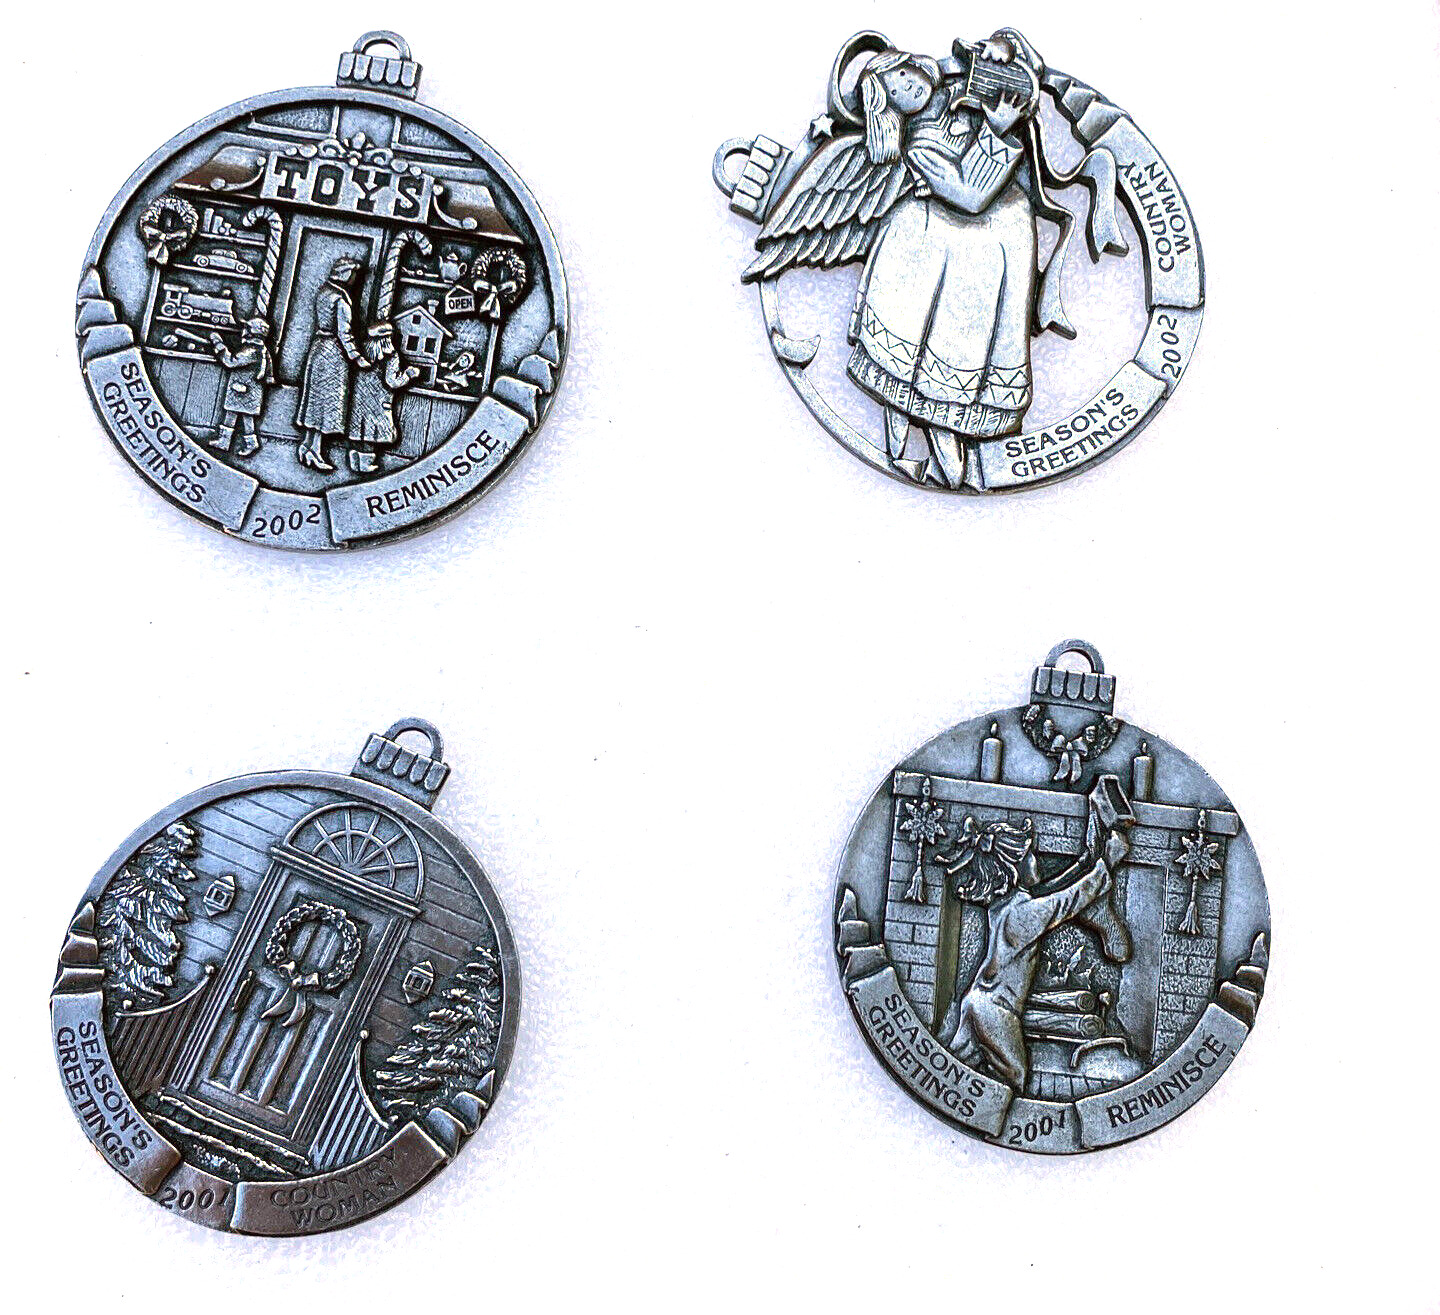 Lot of 4 Vintage Pewter Christmas Ornaments \'Season\'s Greetings - Country\'